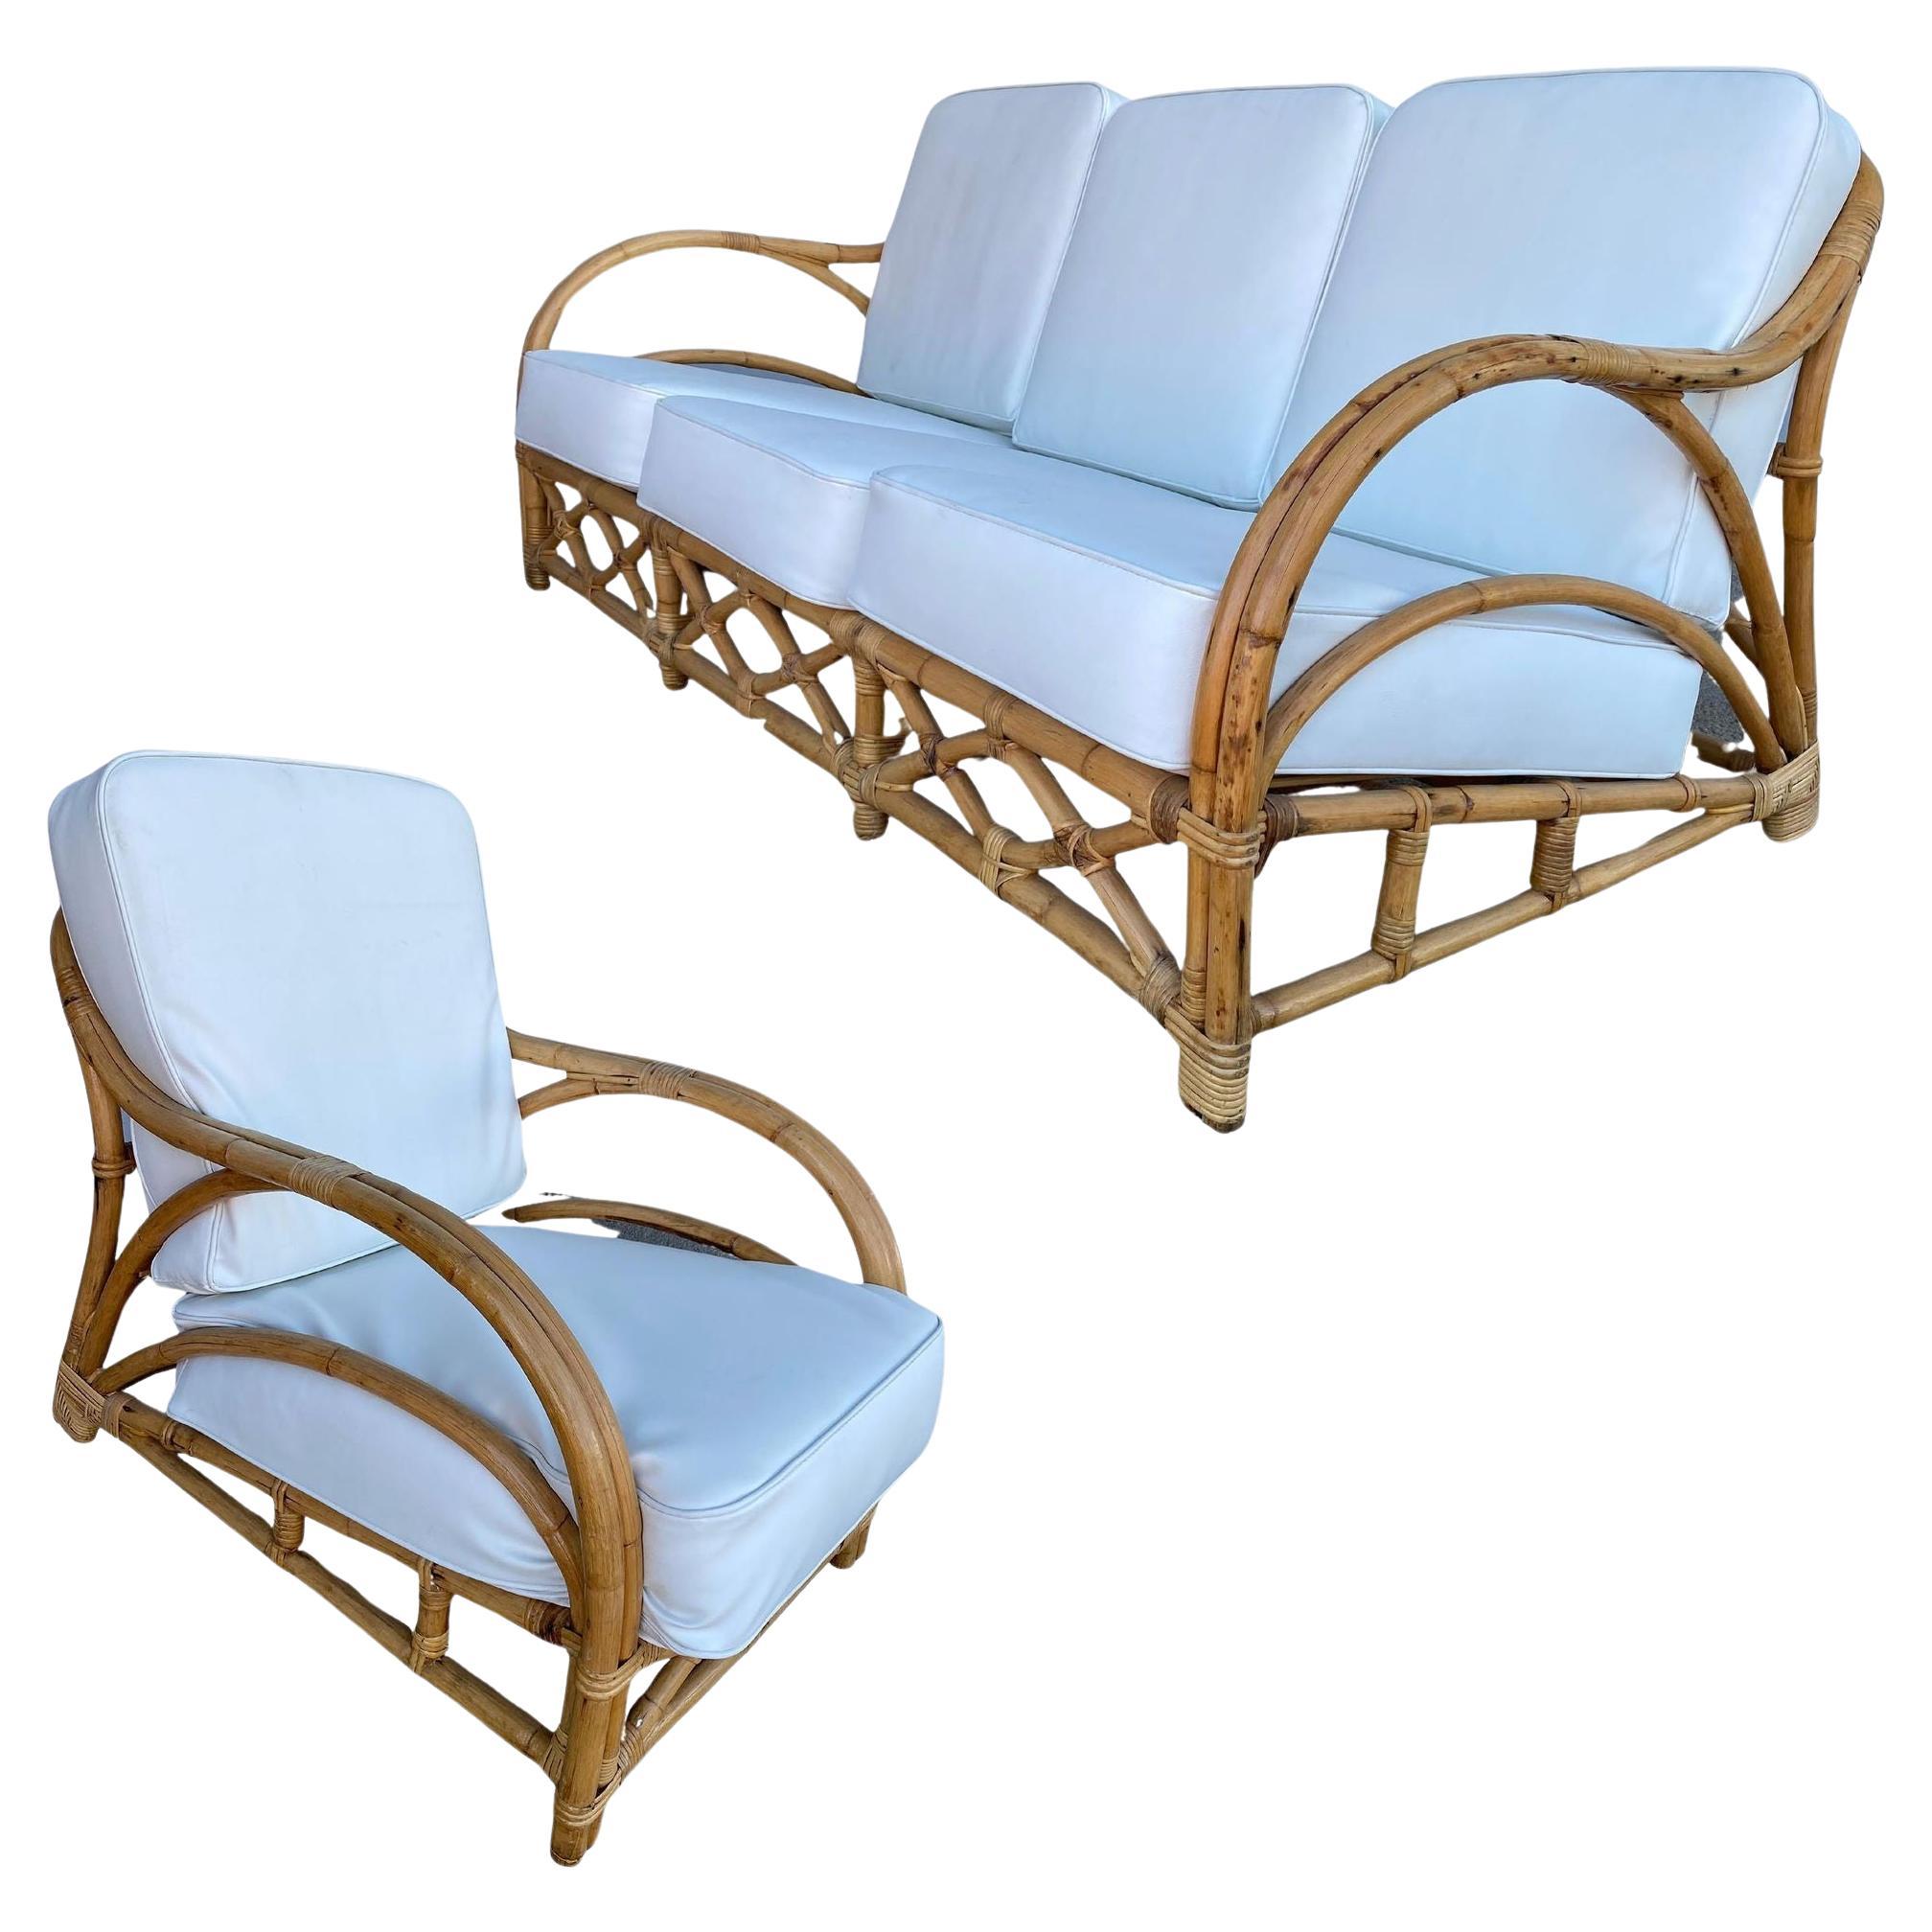 Rare Restored "1940s Transition" Rattan Sofa and Lounge Chair Living Room Set For Sale